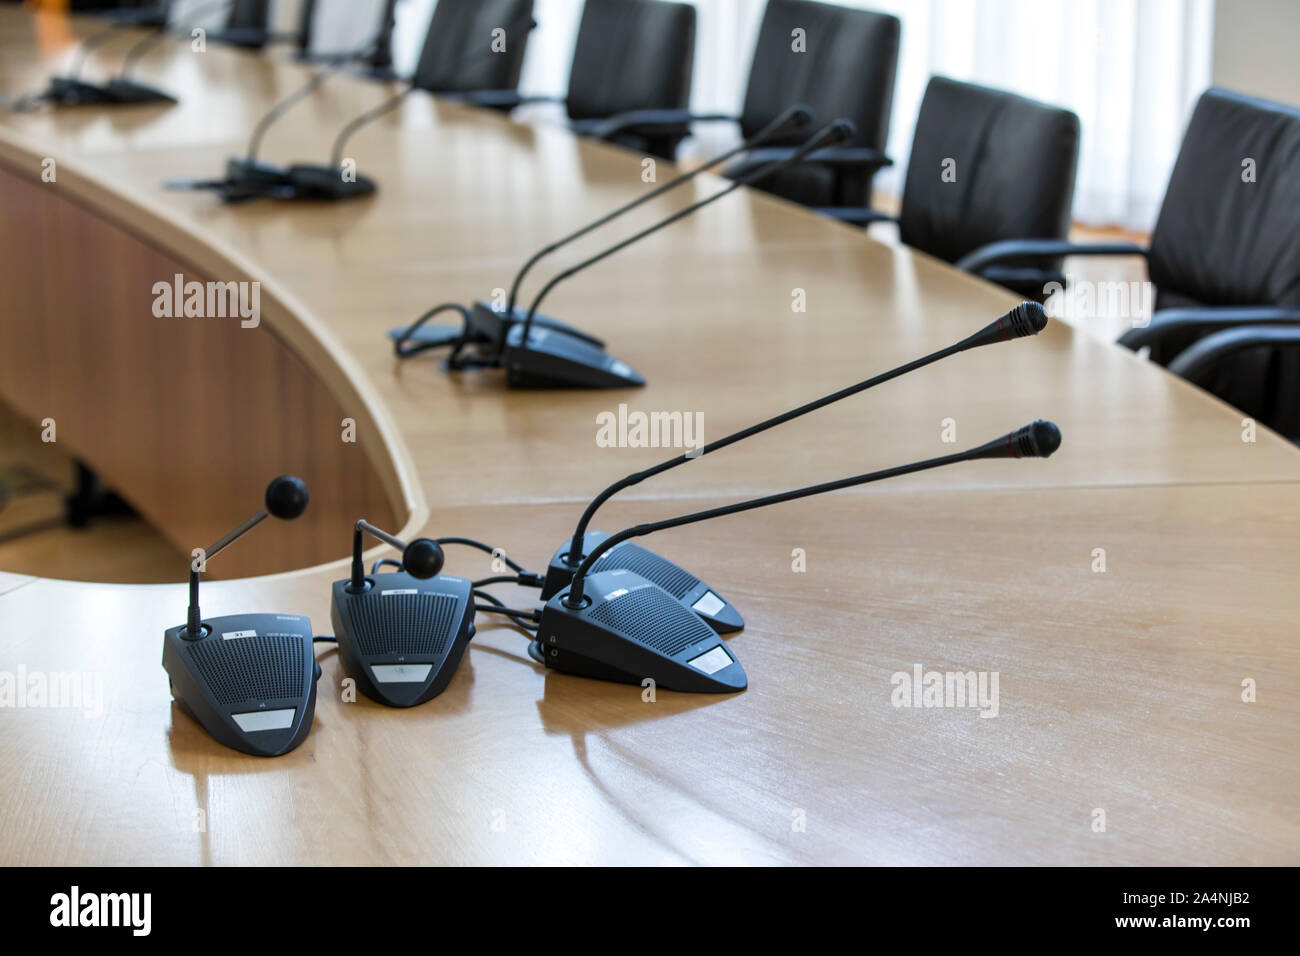 Conference technology, microphones on a conference table, in a conference room, Stock Photo